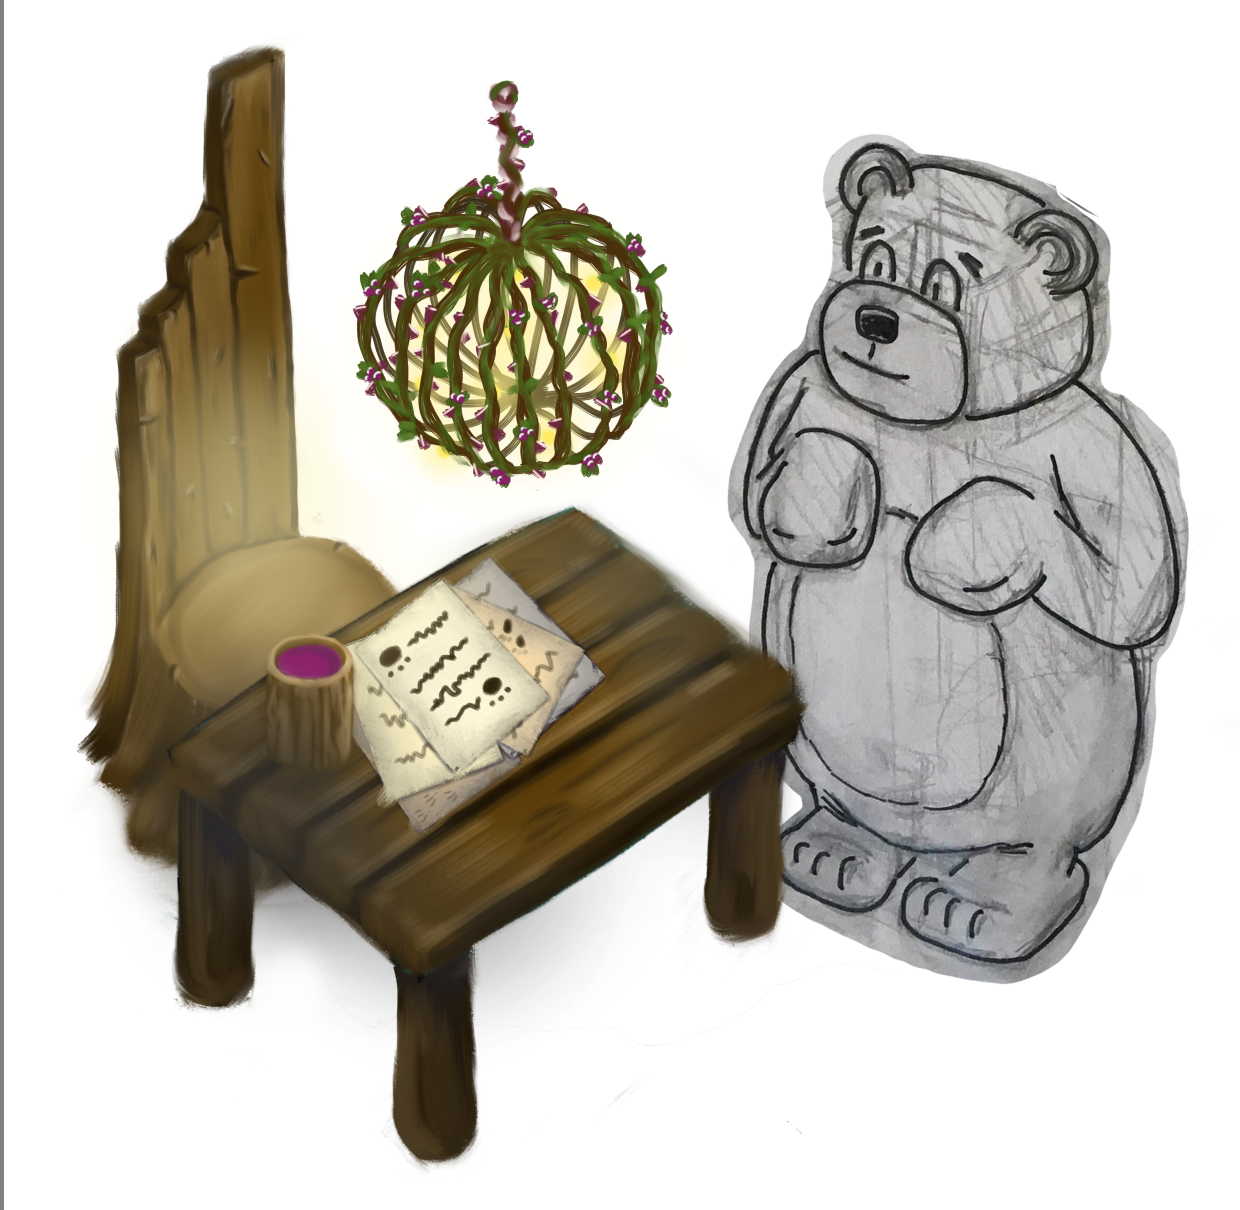 sketch of a bear next to finished woodland furniture props